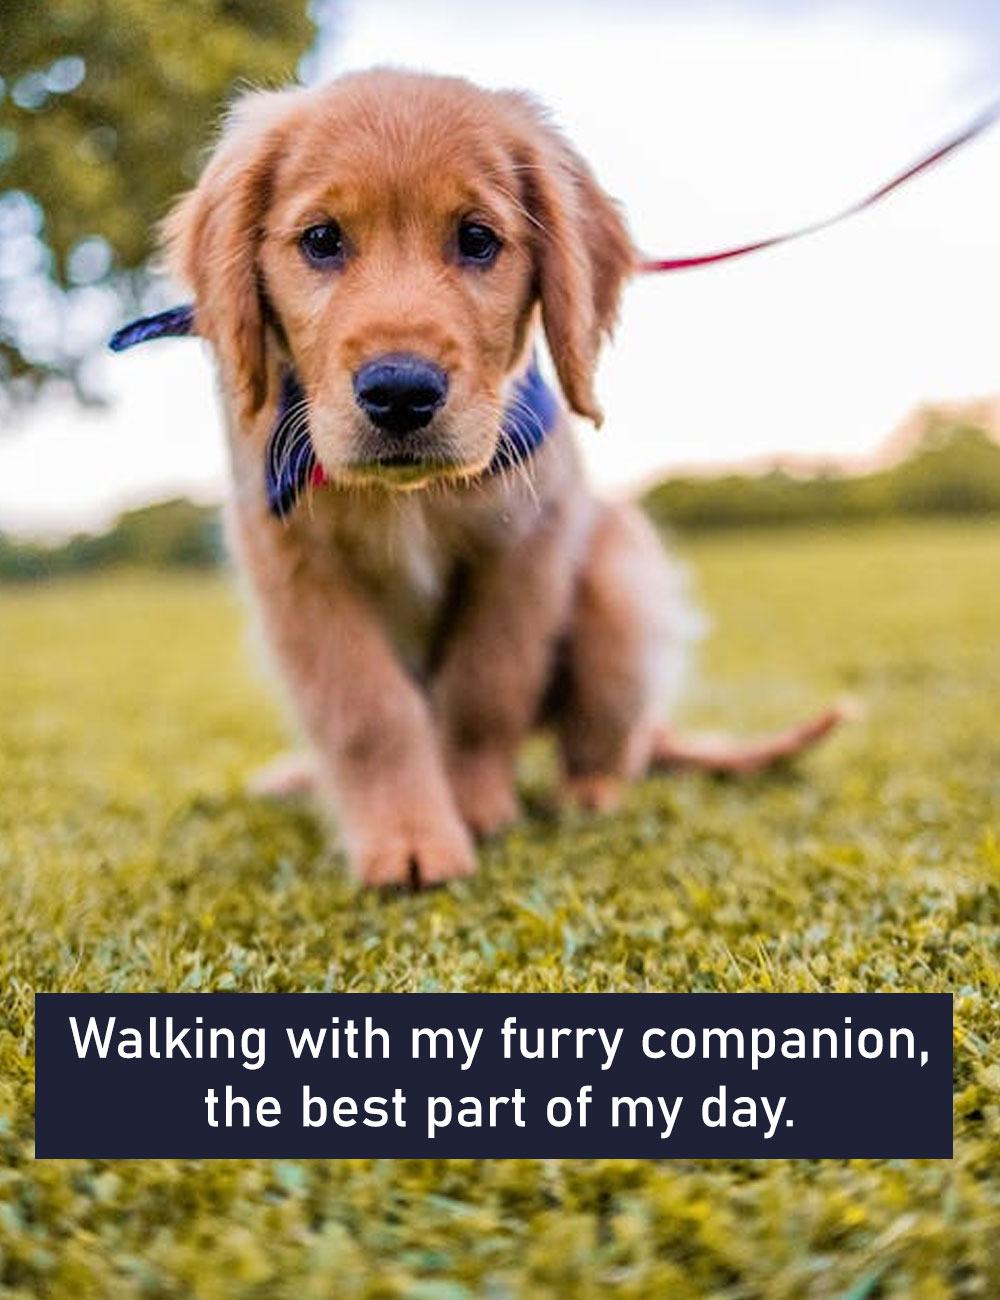 Walking-with-my-furry-companion,-the-best-part-of-my-day.